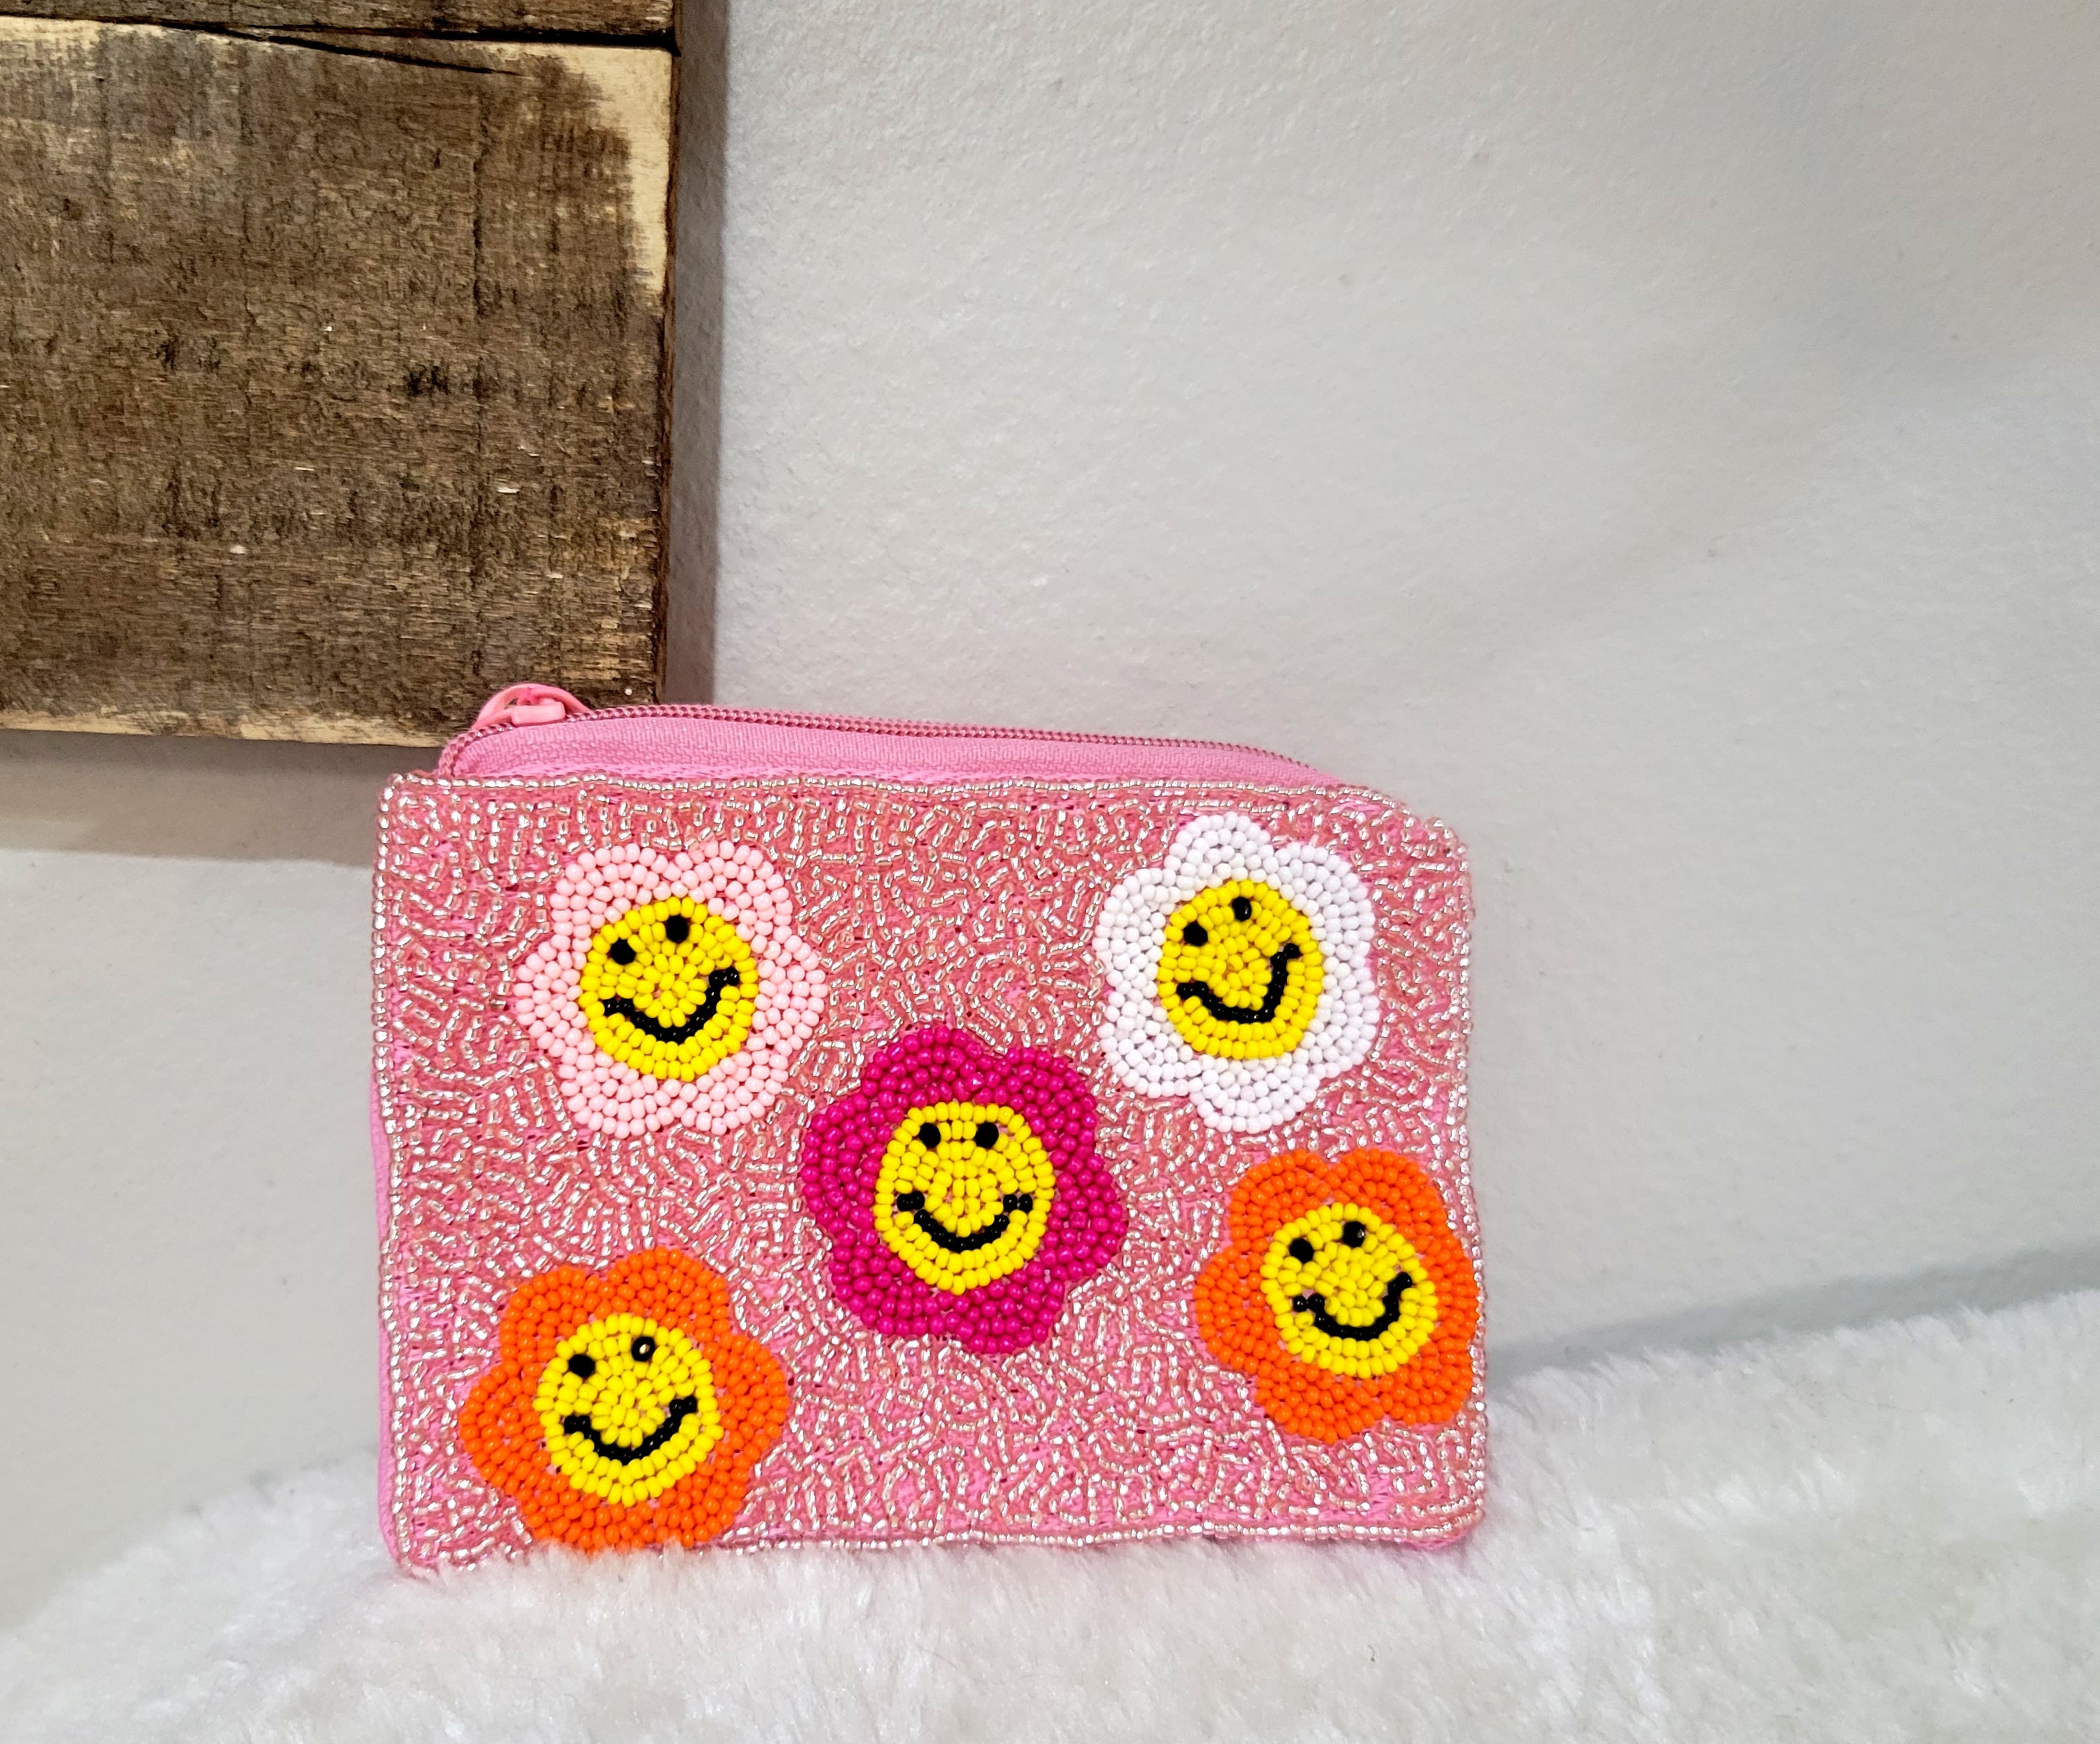 Pink Smiley Face Daisy Seed Bead Coin Purse